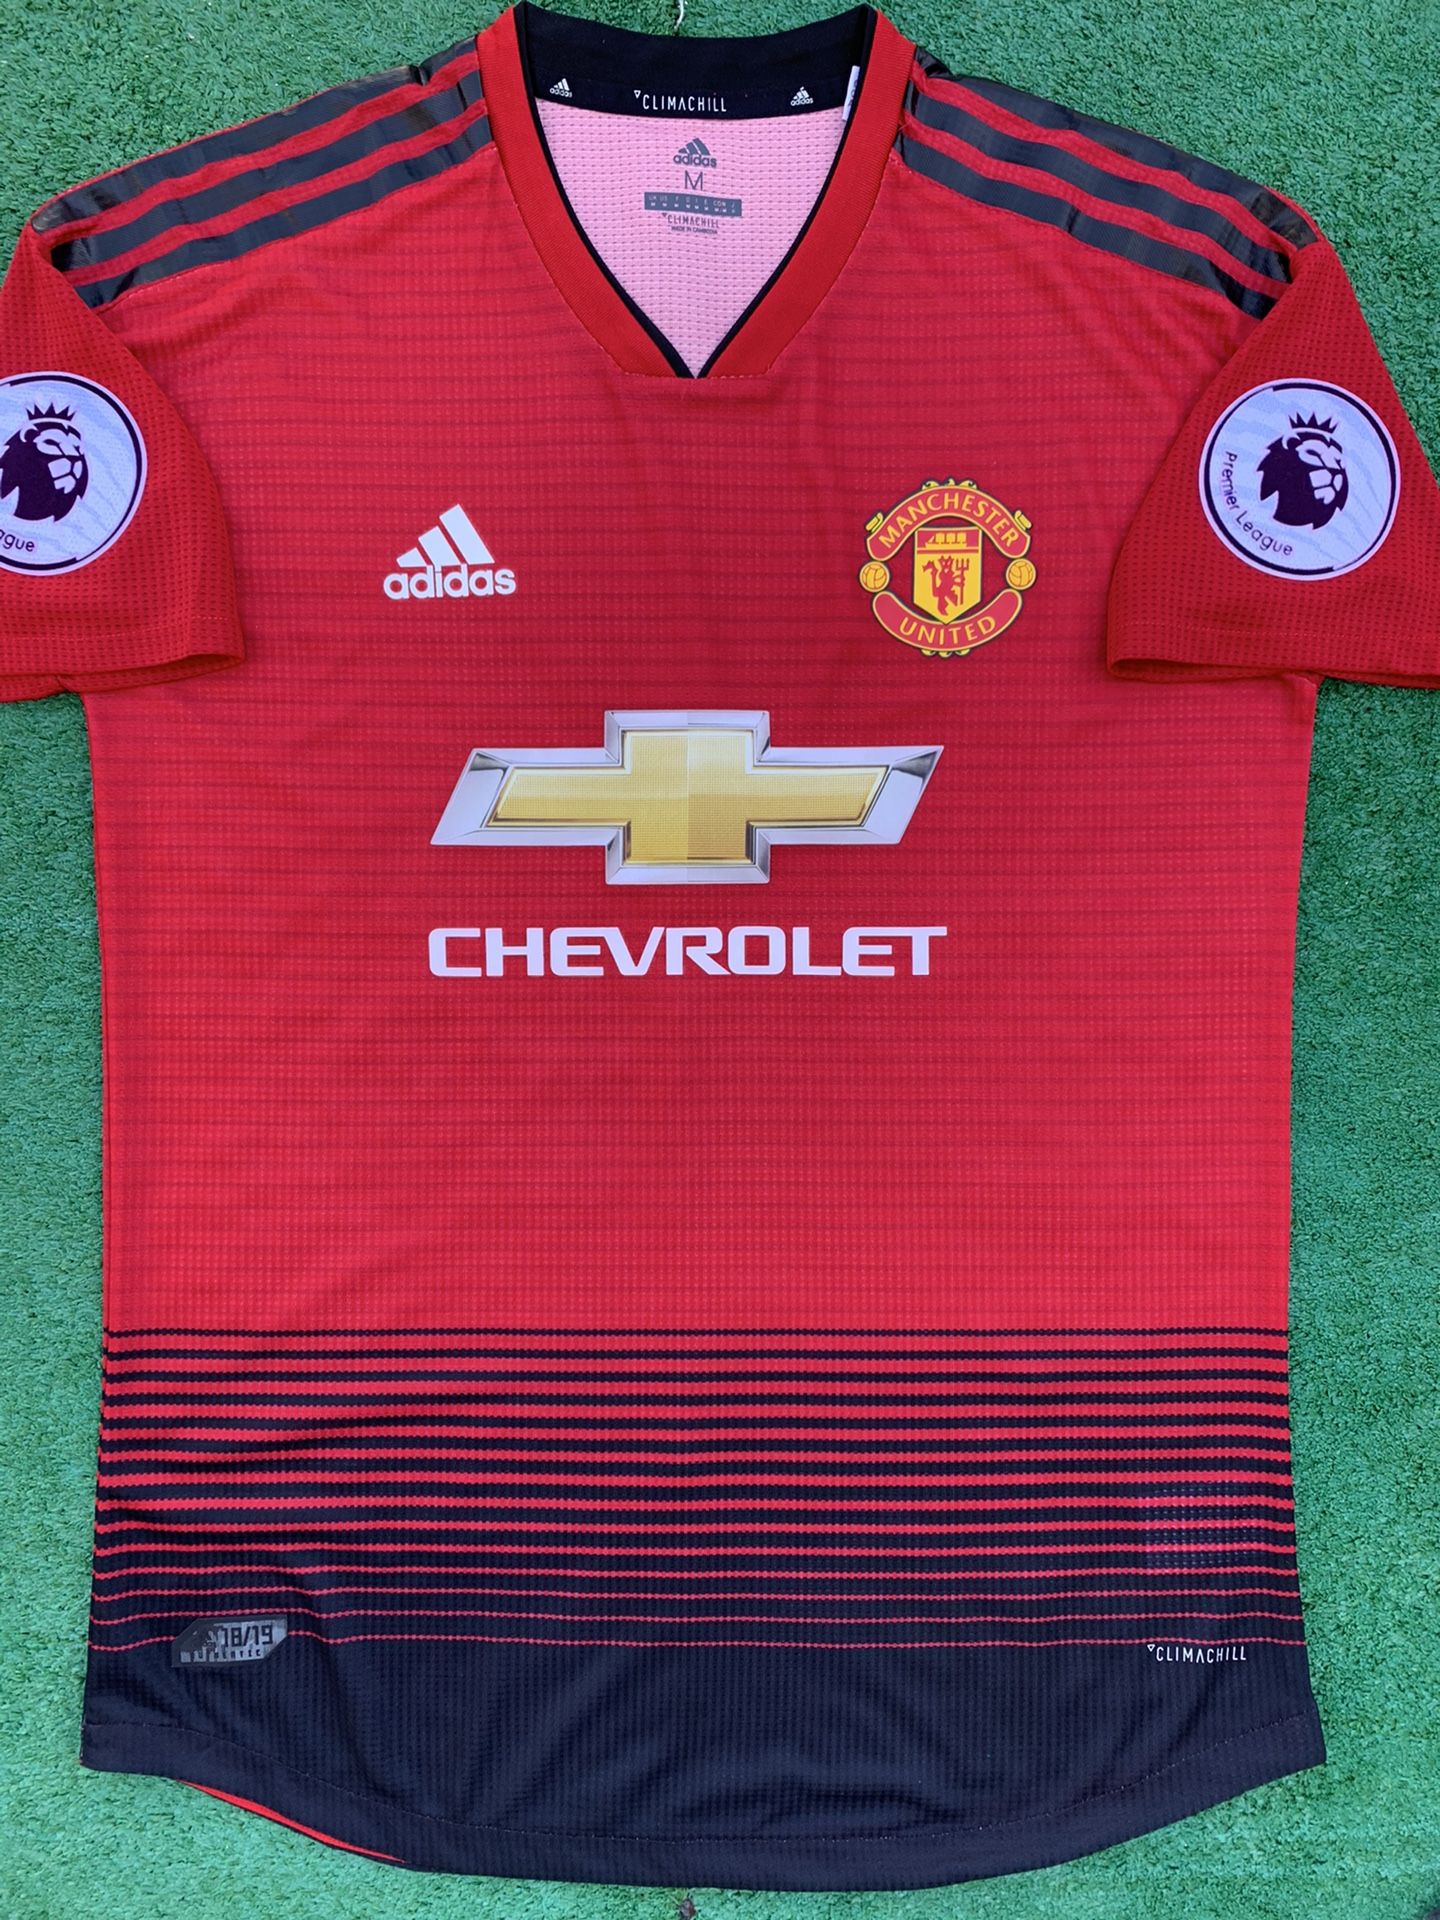 2018/19 Manchester United soccer jersey M